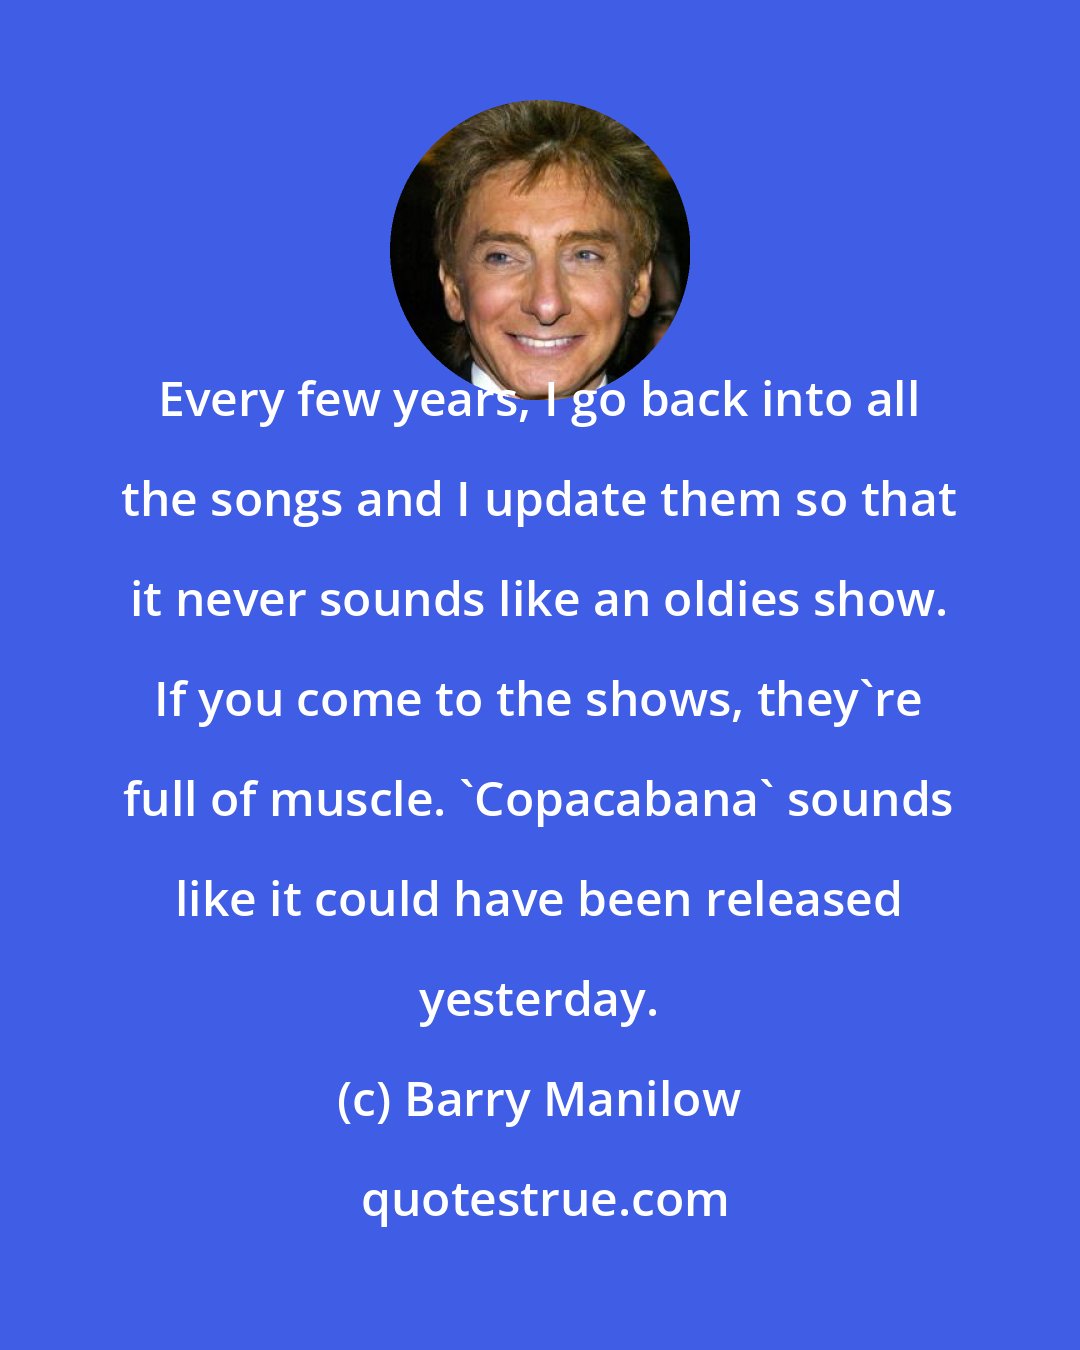 Barry Manilow: Every few years, I go back into all the songs and I update them so that it never sounds like an oldies show. If you come to the shows, they're full of muscle. 'Copacabana' sounds like it could have been released yesterday.